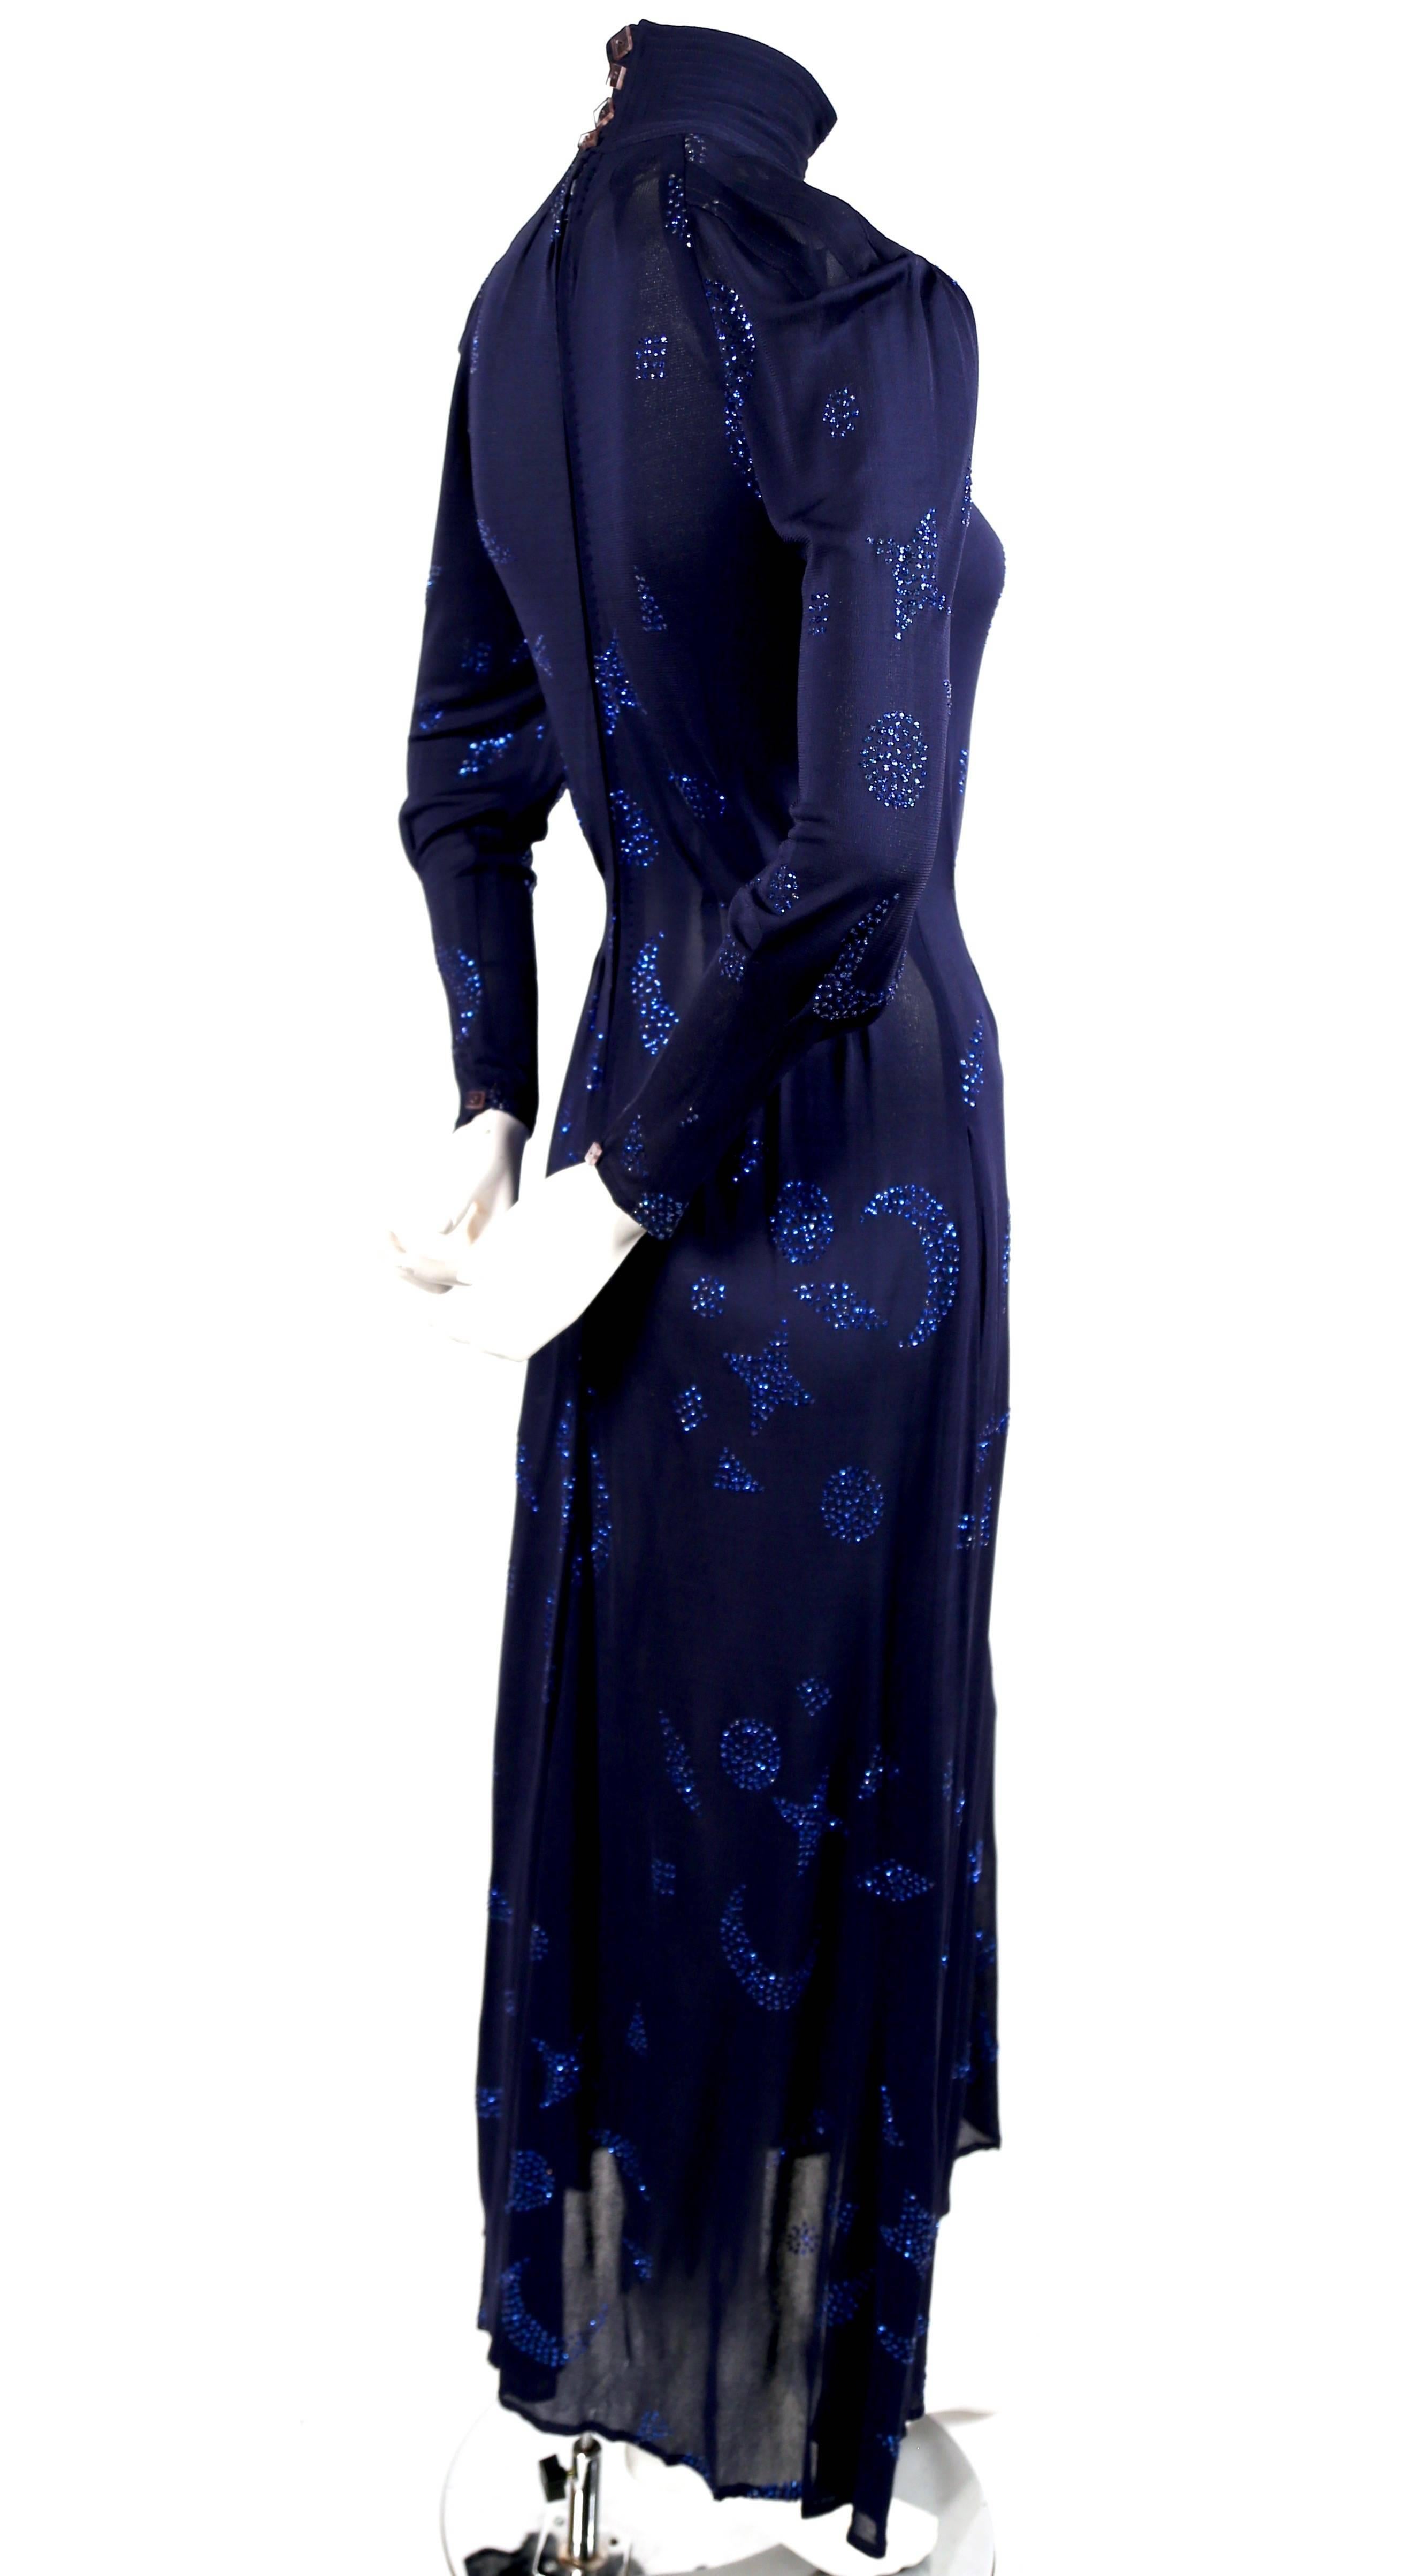 Very rare blue jersey dress with sparkling star and moon motif from Jean Muir dating to the 1970's. Dress has a very flattering cut. It is labeled a UK 8 which best fits a US 2-6. Zips up center back and secures at back of neck with four square